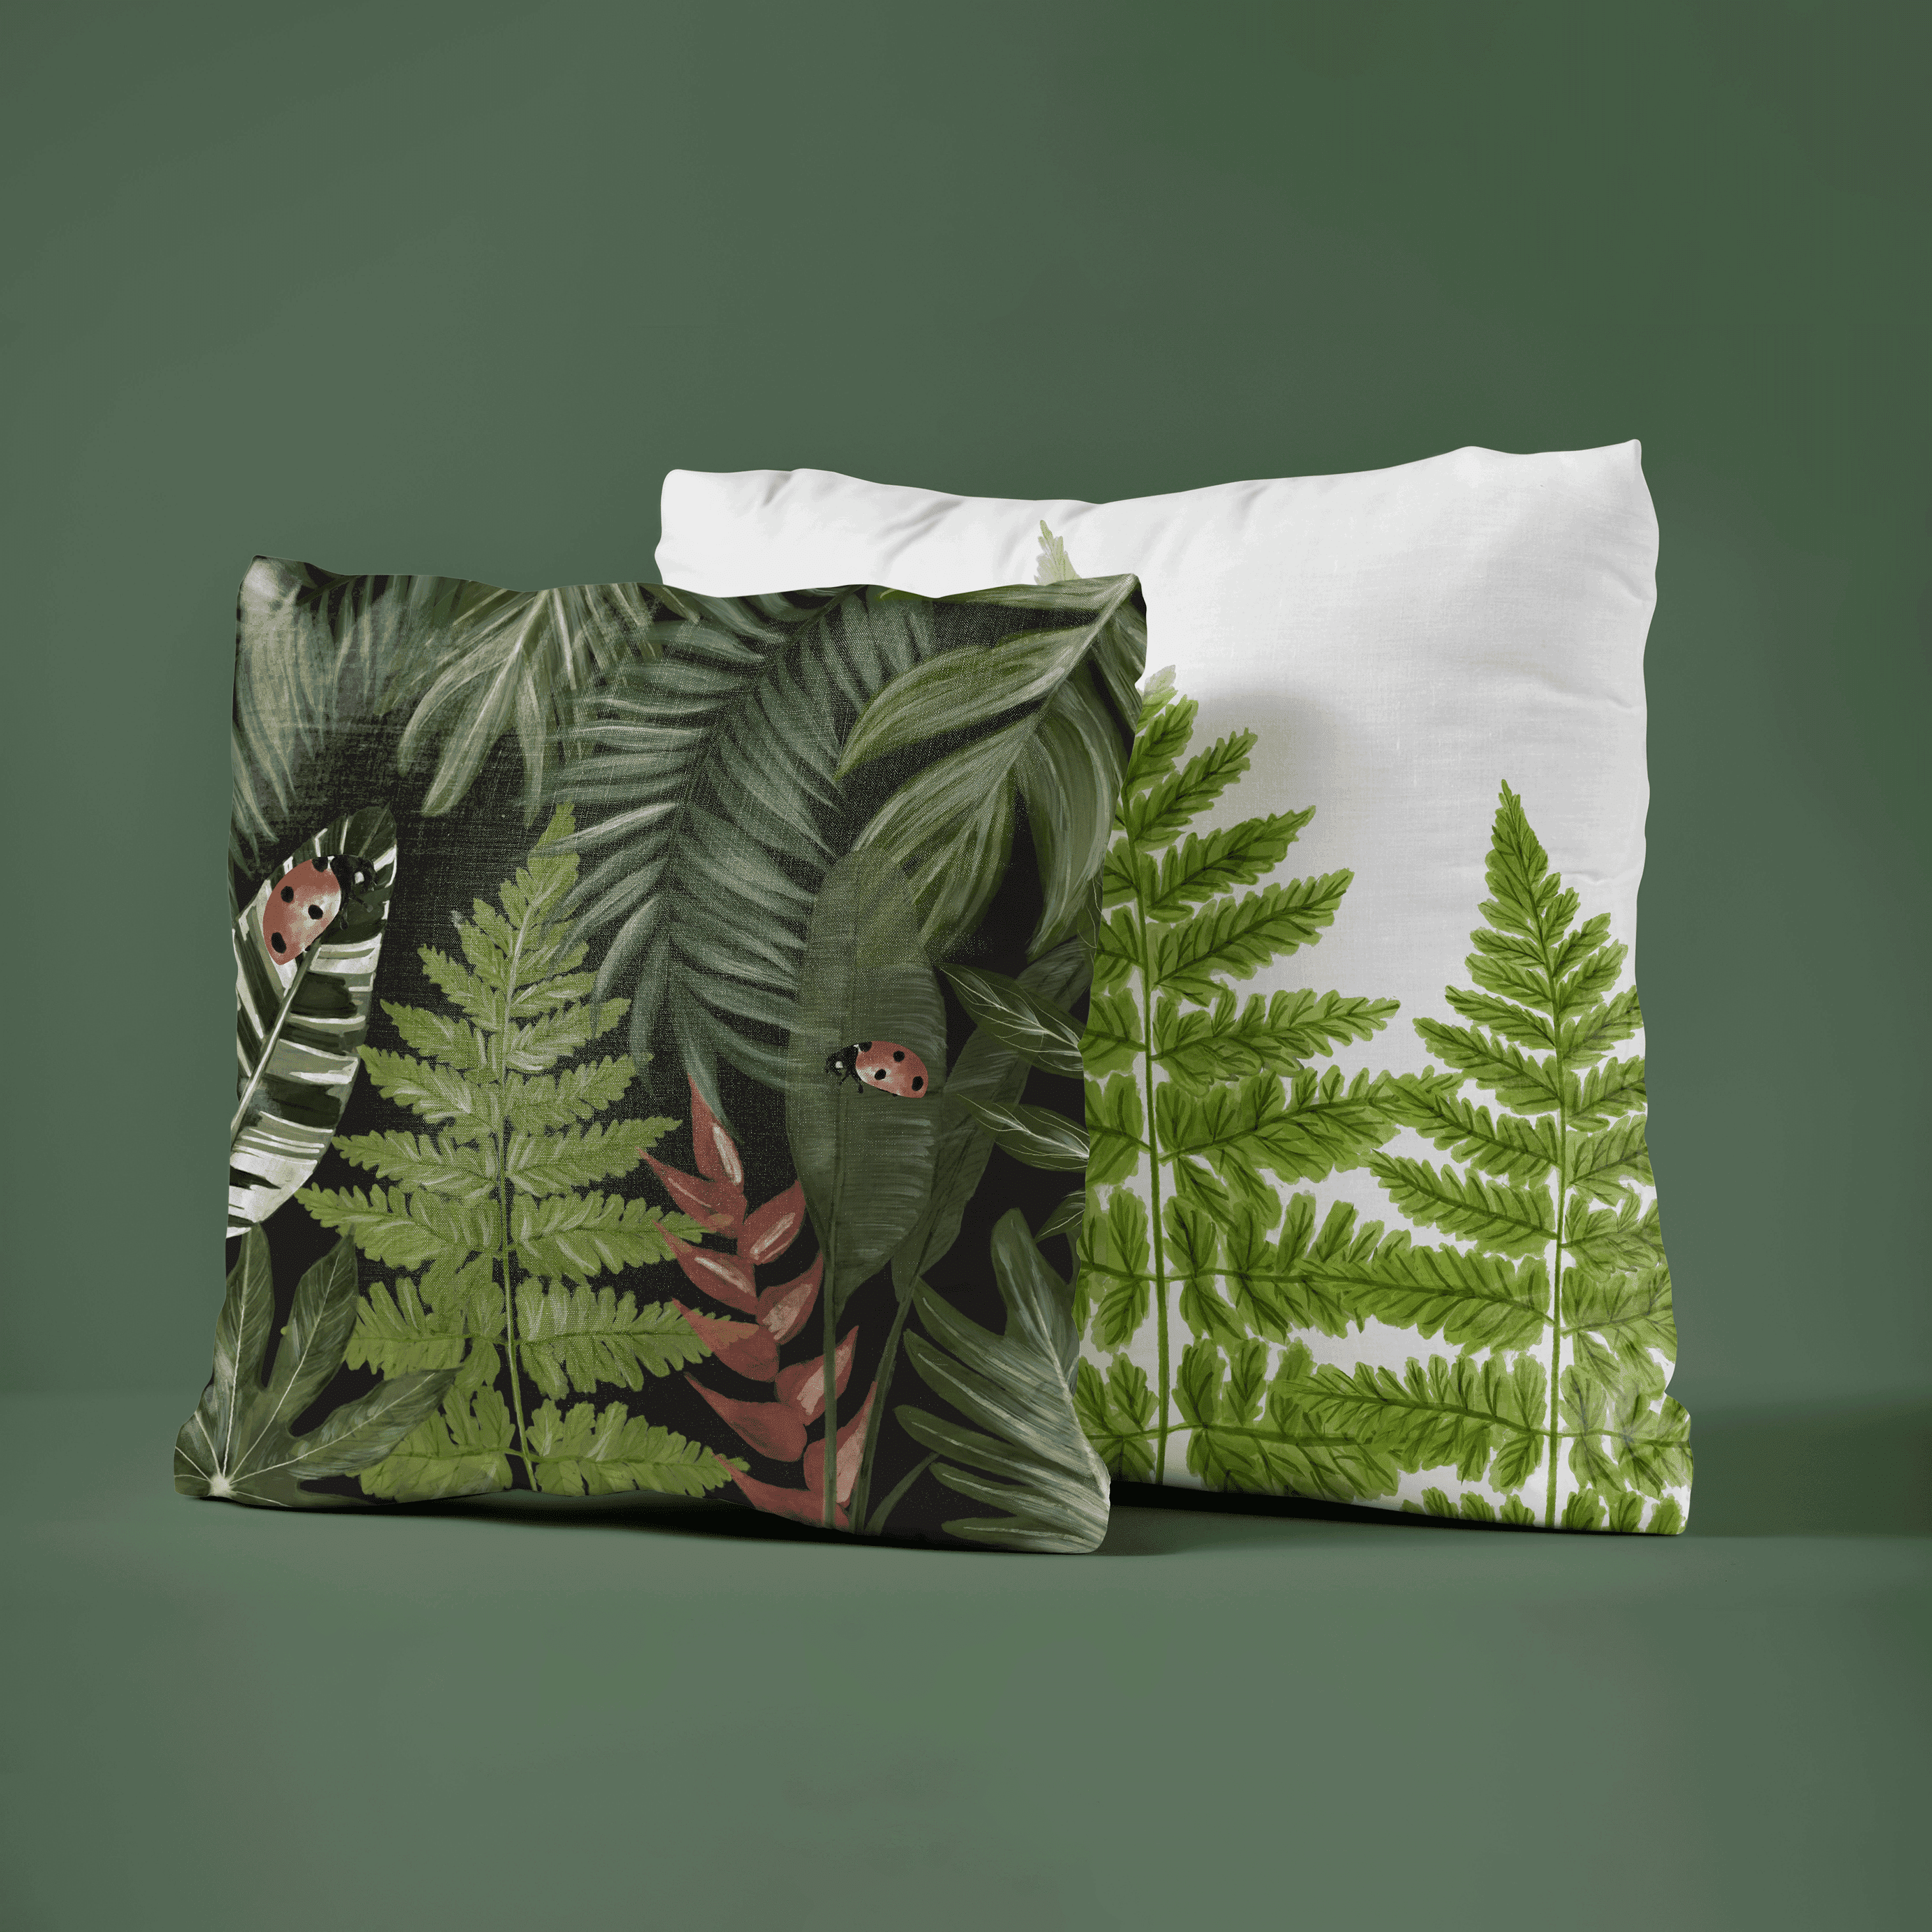 Our Lady Beetle Night X Ferns in Bloom | Set of 2